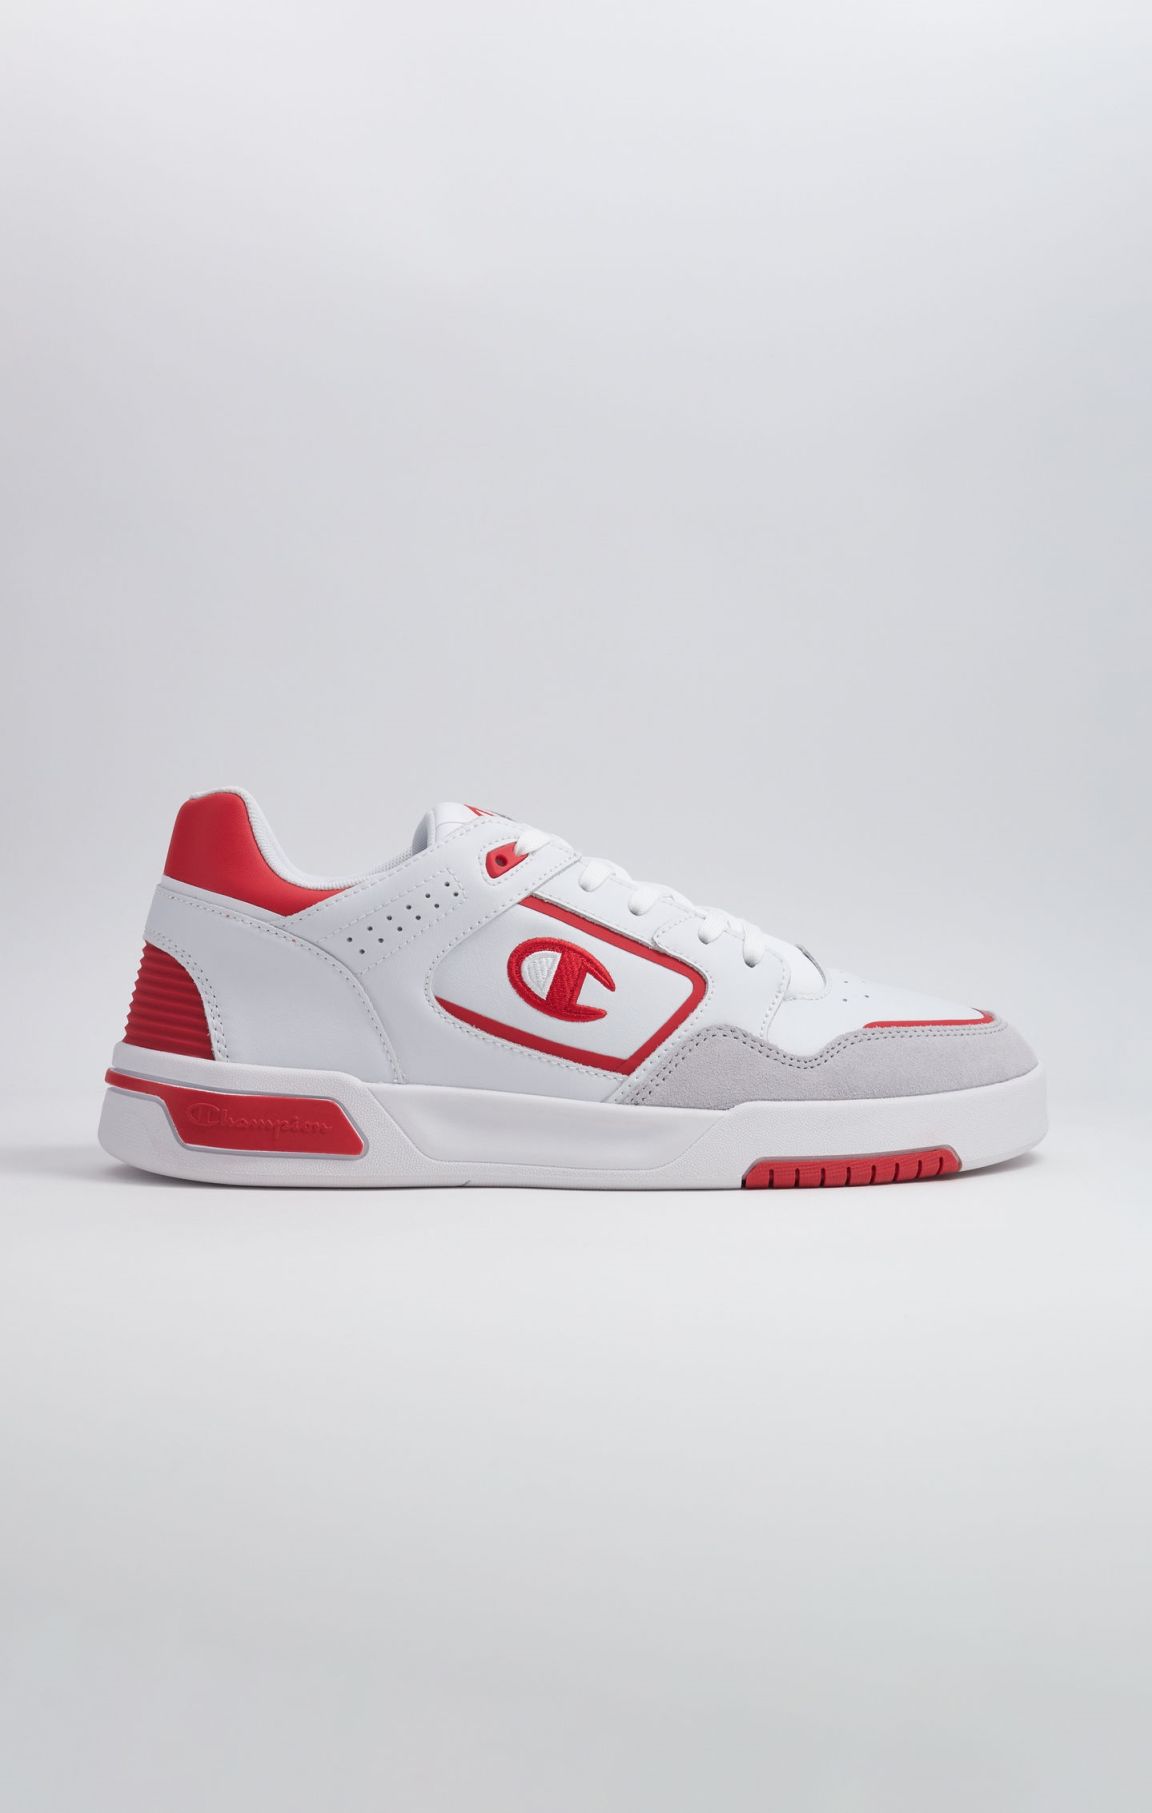 New Champion Men's red shoes | Mens red shoes, Red shoes, New champion